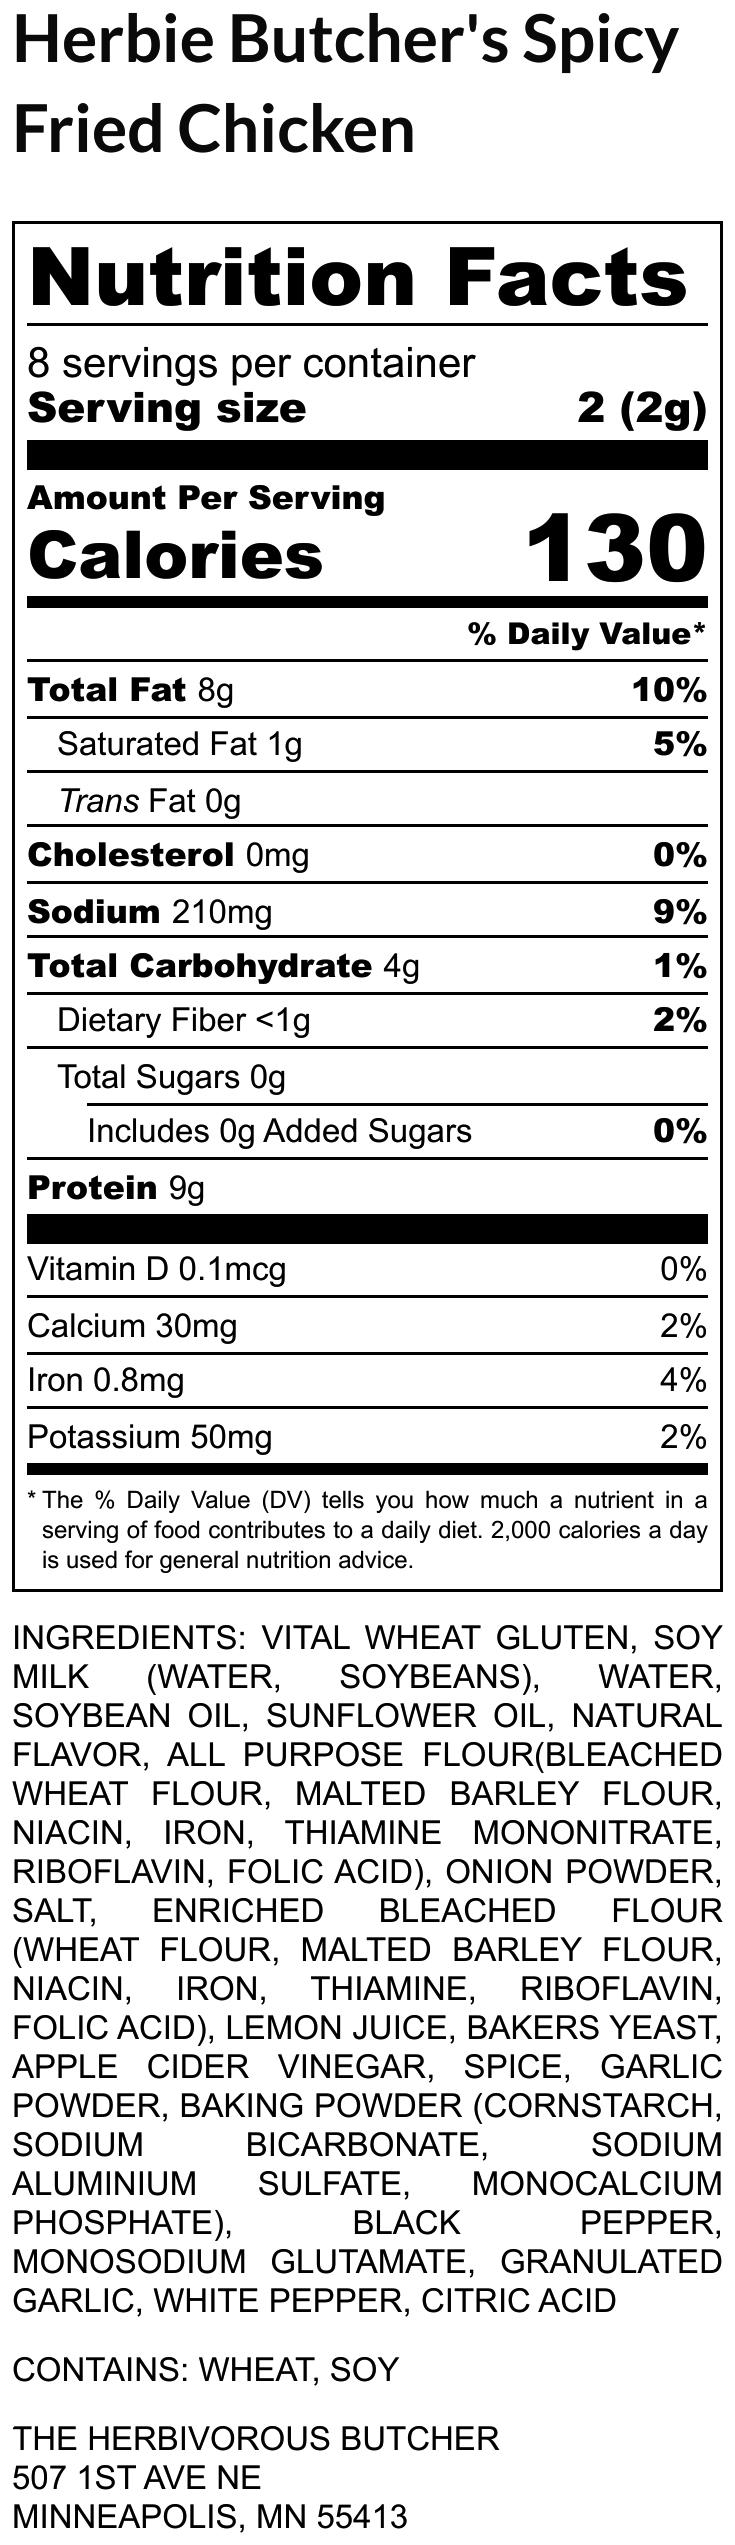 nutritional label for spicy vegan fried chicken